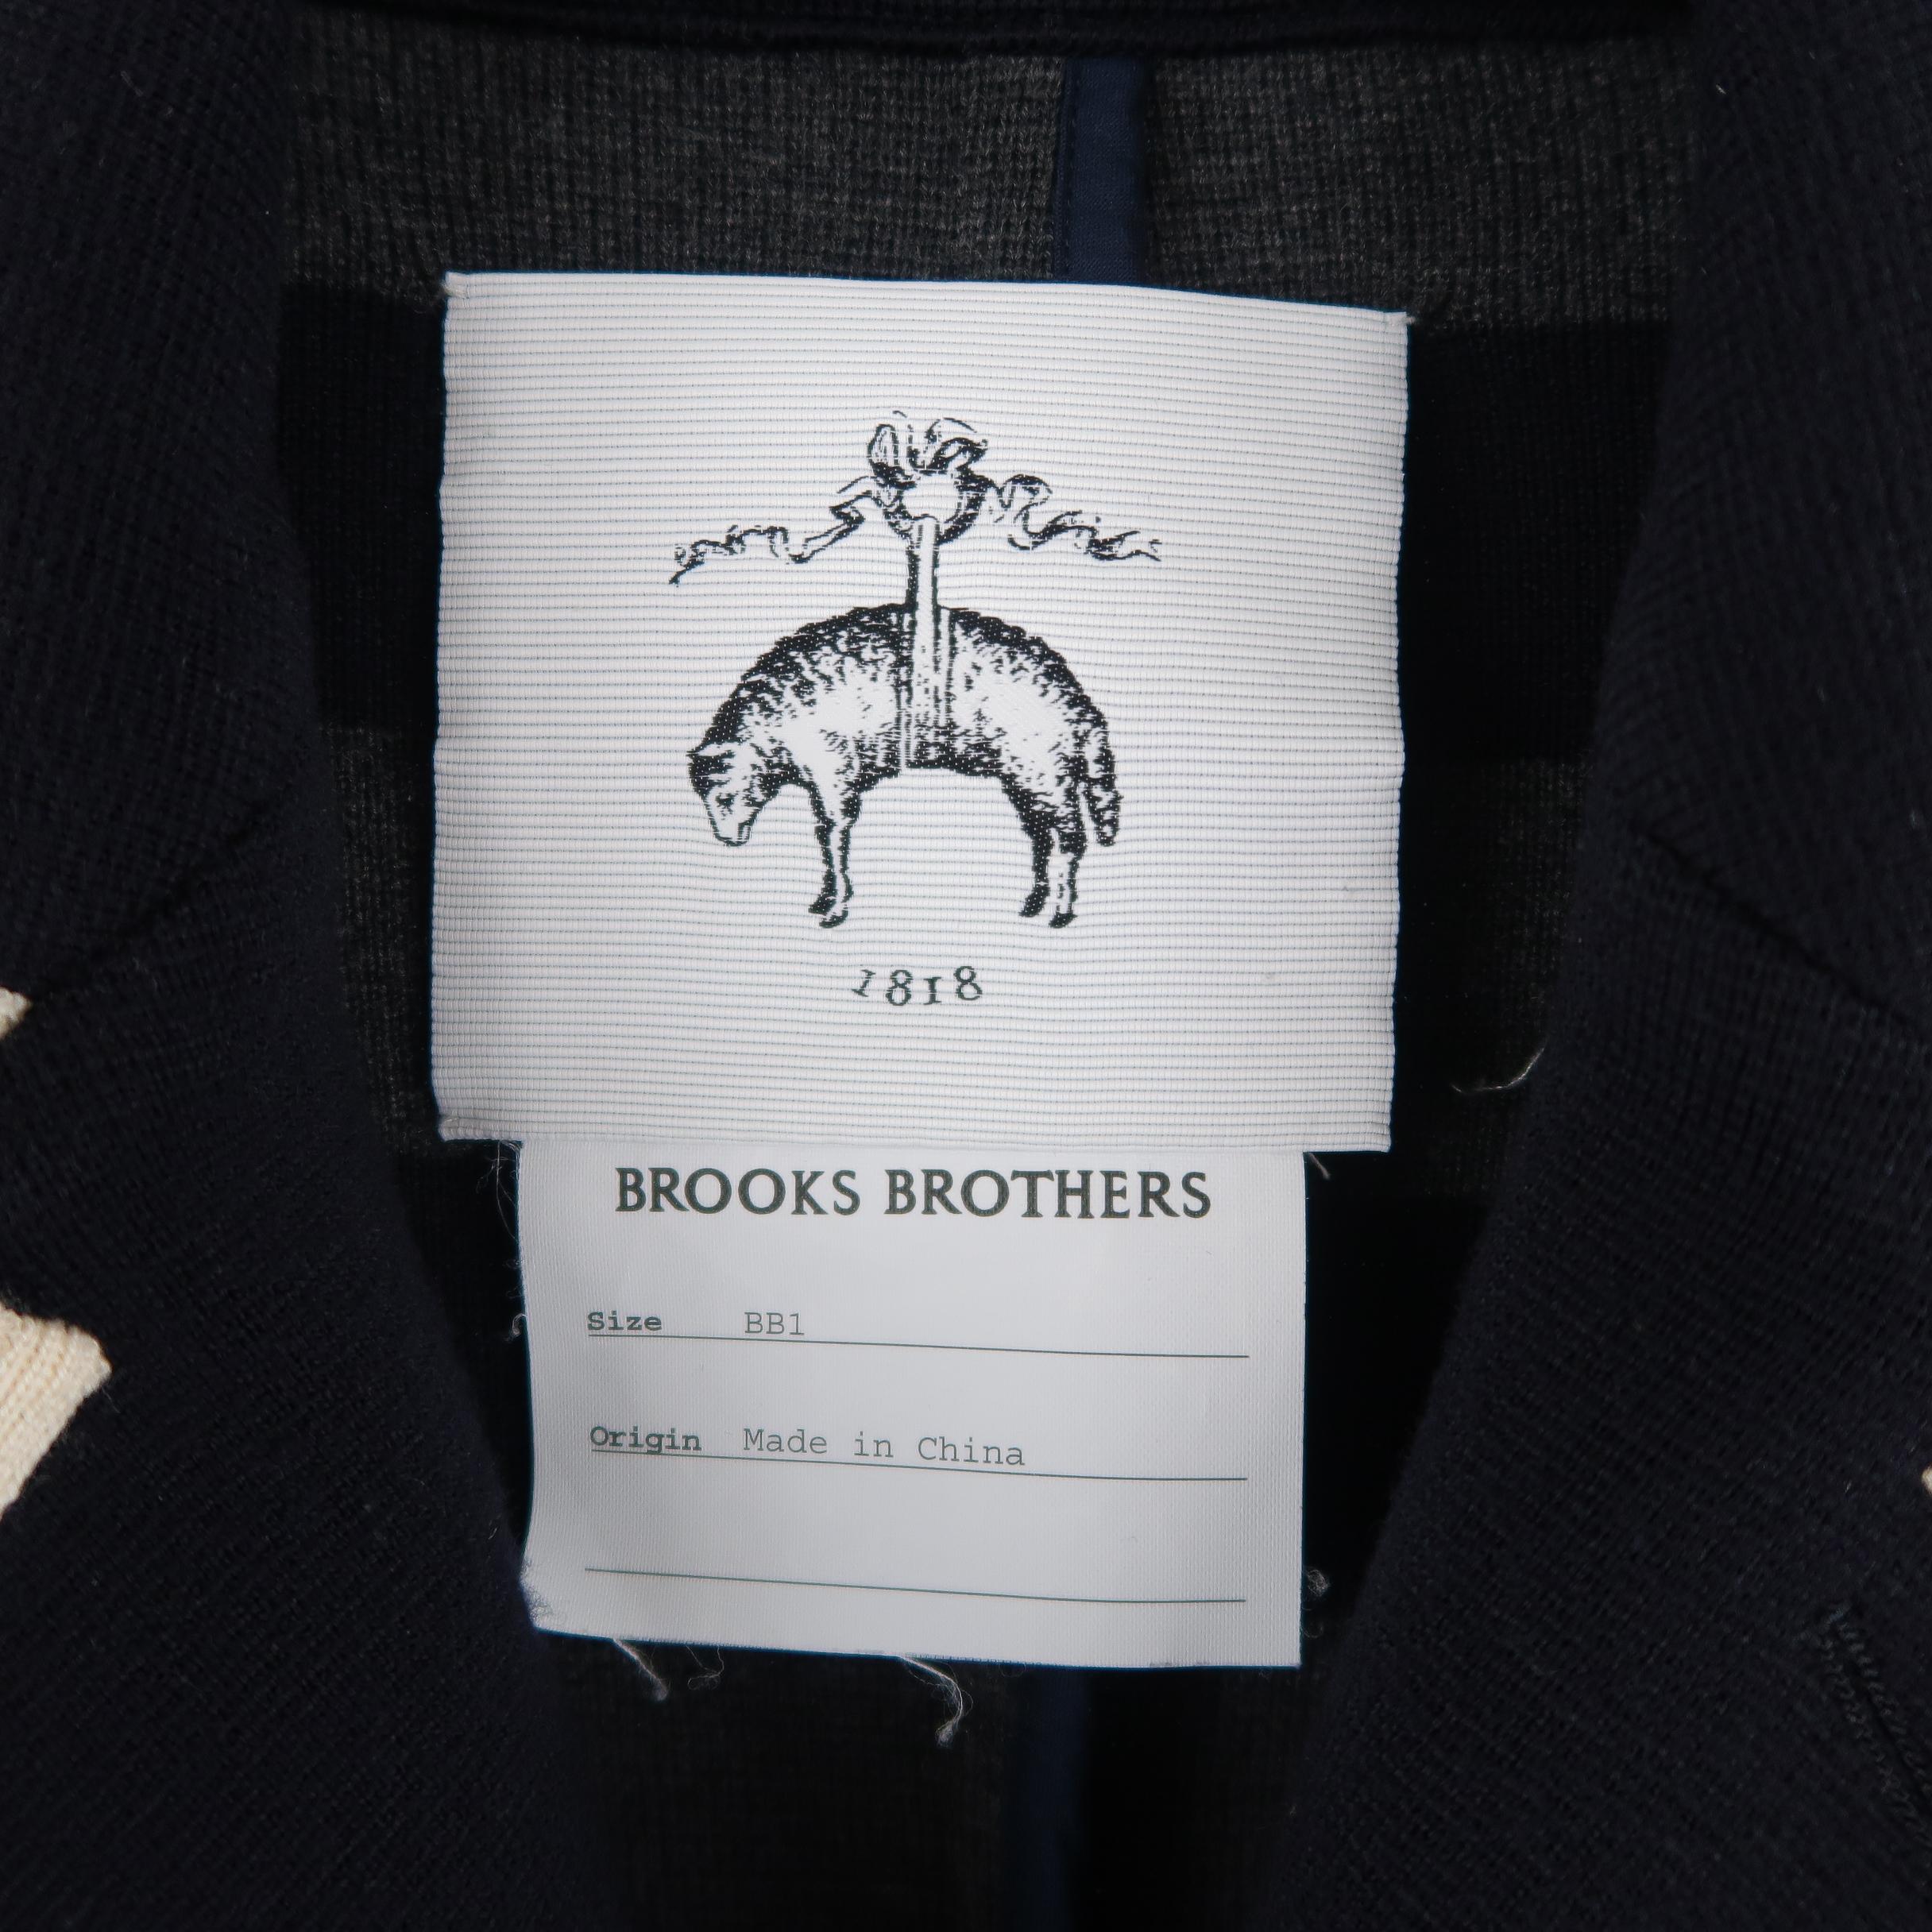 BROOKS BROTHERS sport coat comes in navy blue wool knit with cream and gray piping, notch lapel, three button single breasted front, flap pockets, and button cuffs. Retail price $1,800.00. 
 
Excellent Pre-Owned Condition.
Marked: BB1
